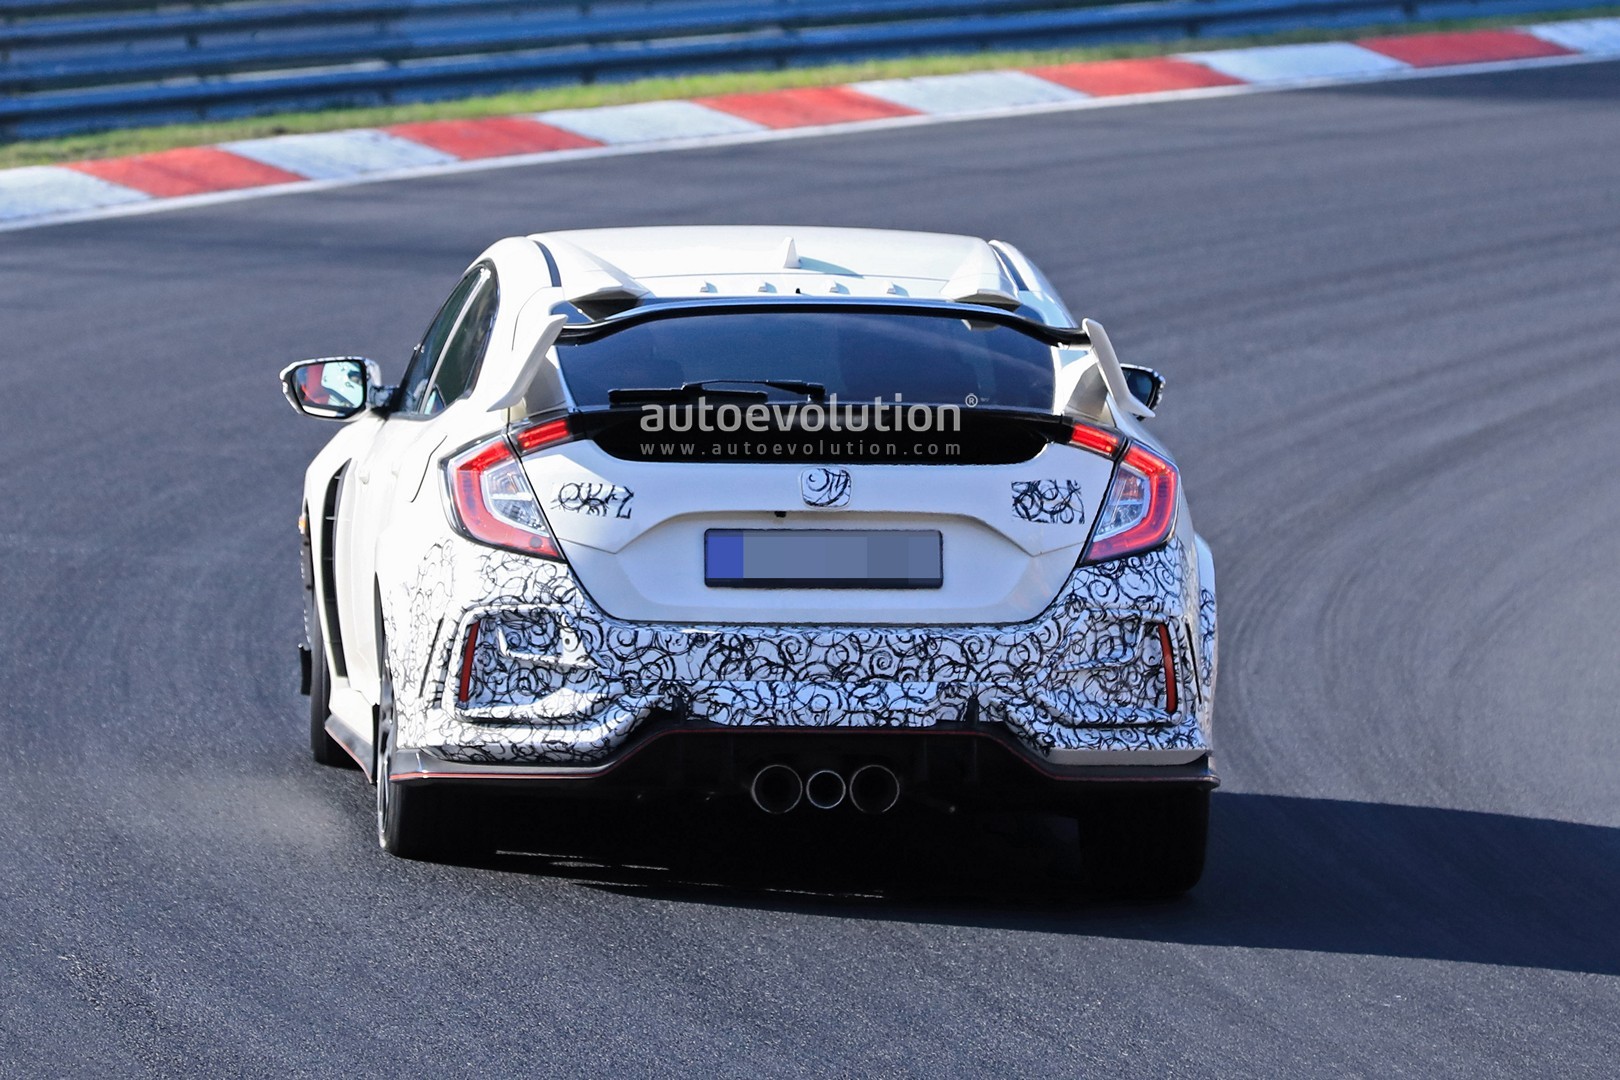 2020 Honda Civic Type R Prototypes Spied at the Nurburgring - autoevolution